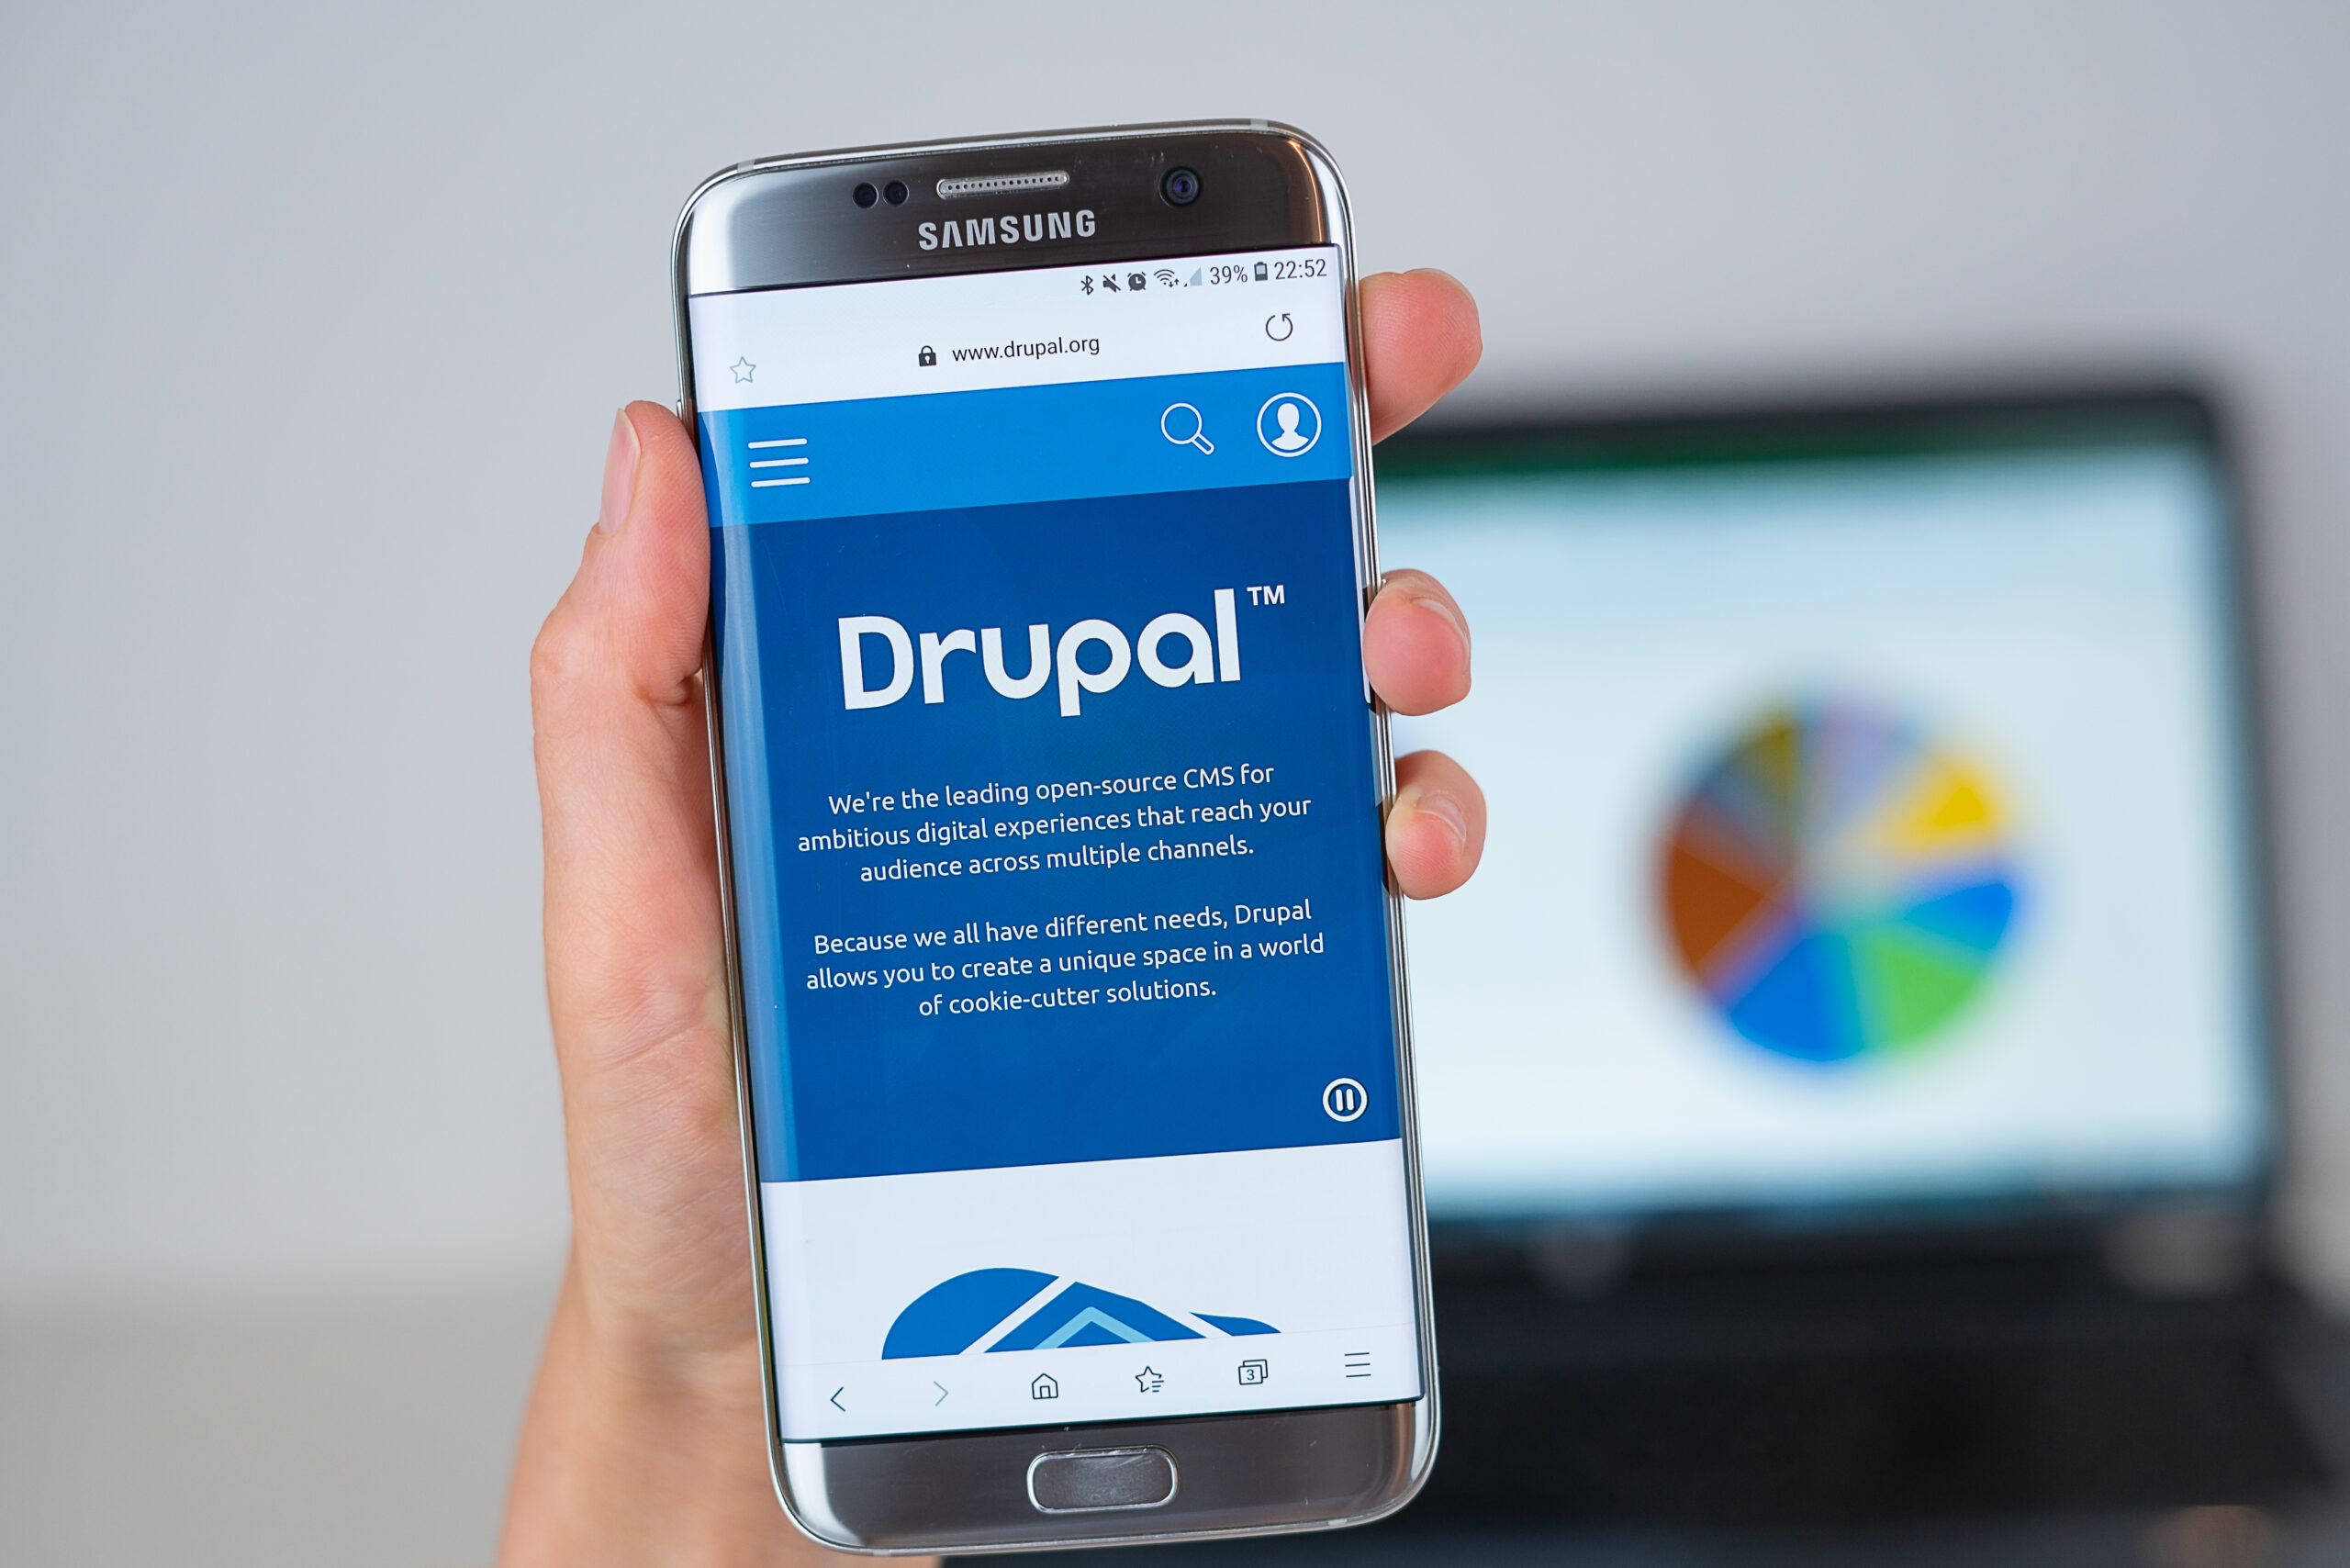 Why upgrade from Drupal 7 to Drupal 9?